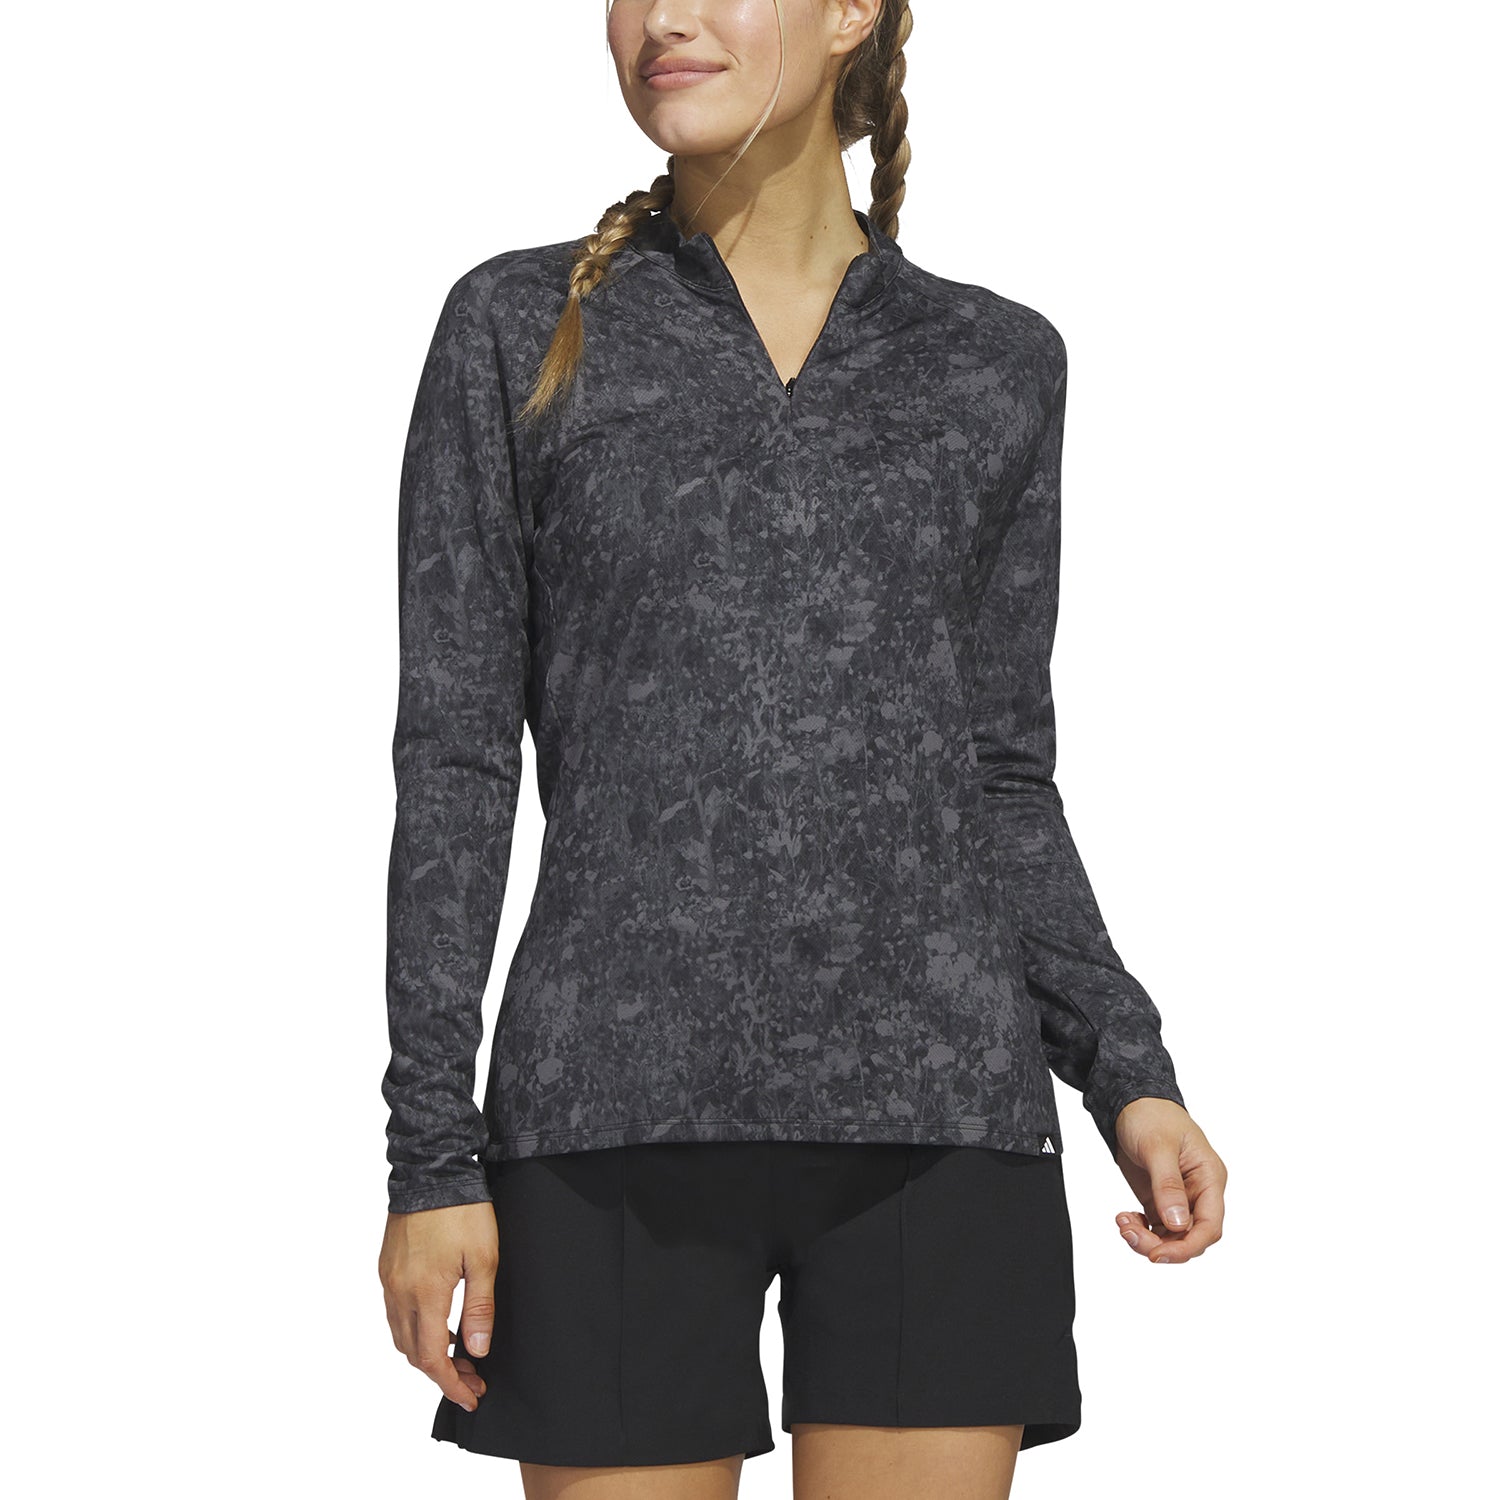 adidas Ladies Long Sleeve Zip-Neck Golf Top with Abstract Print in Black